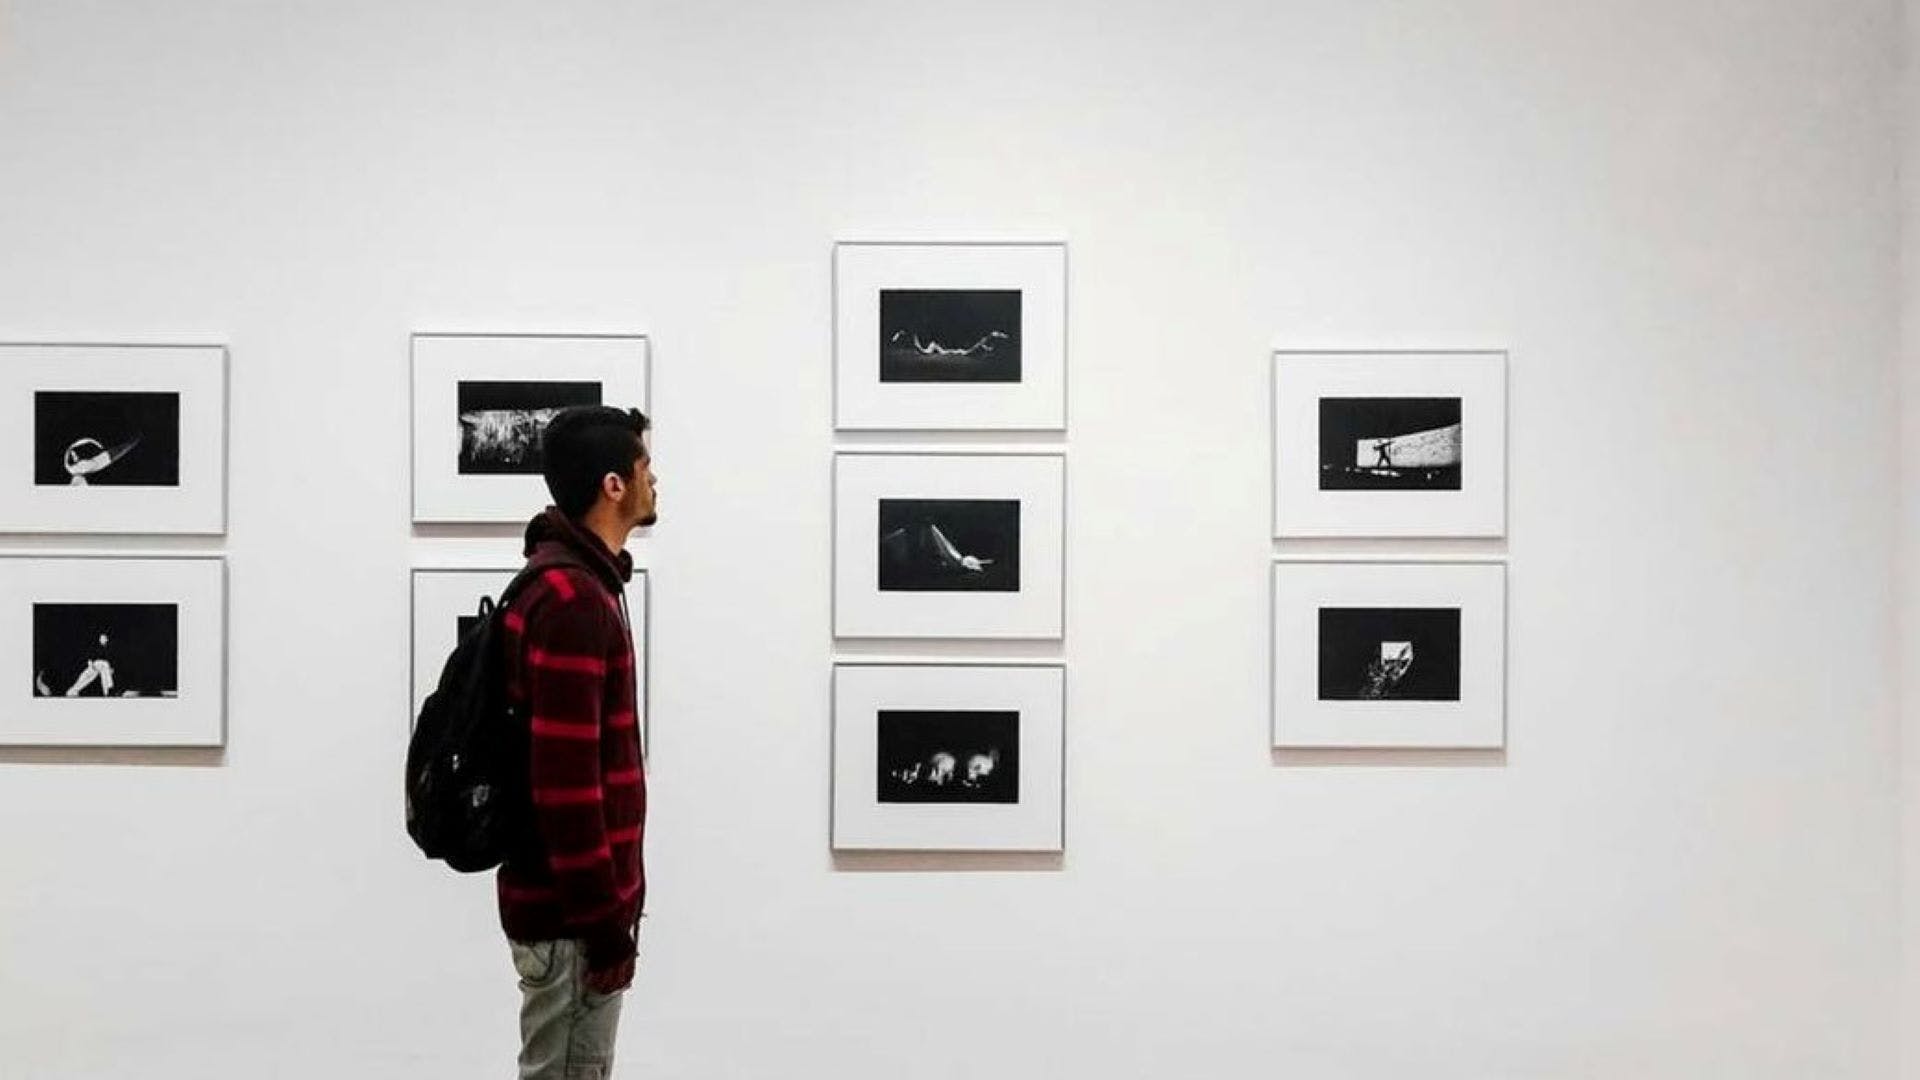 White,Standing,Wall,Art,Exhibition,Art exhibition,Visual arts,Tourist attraction,Room,Art gallery